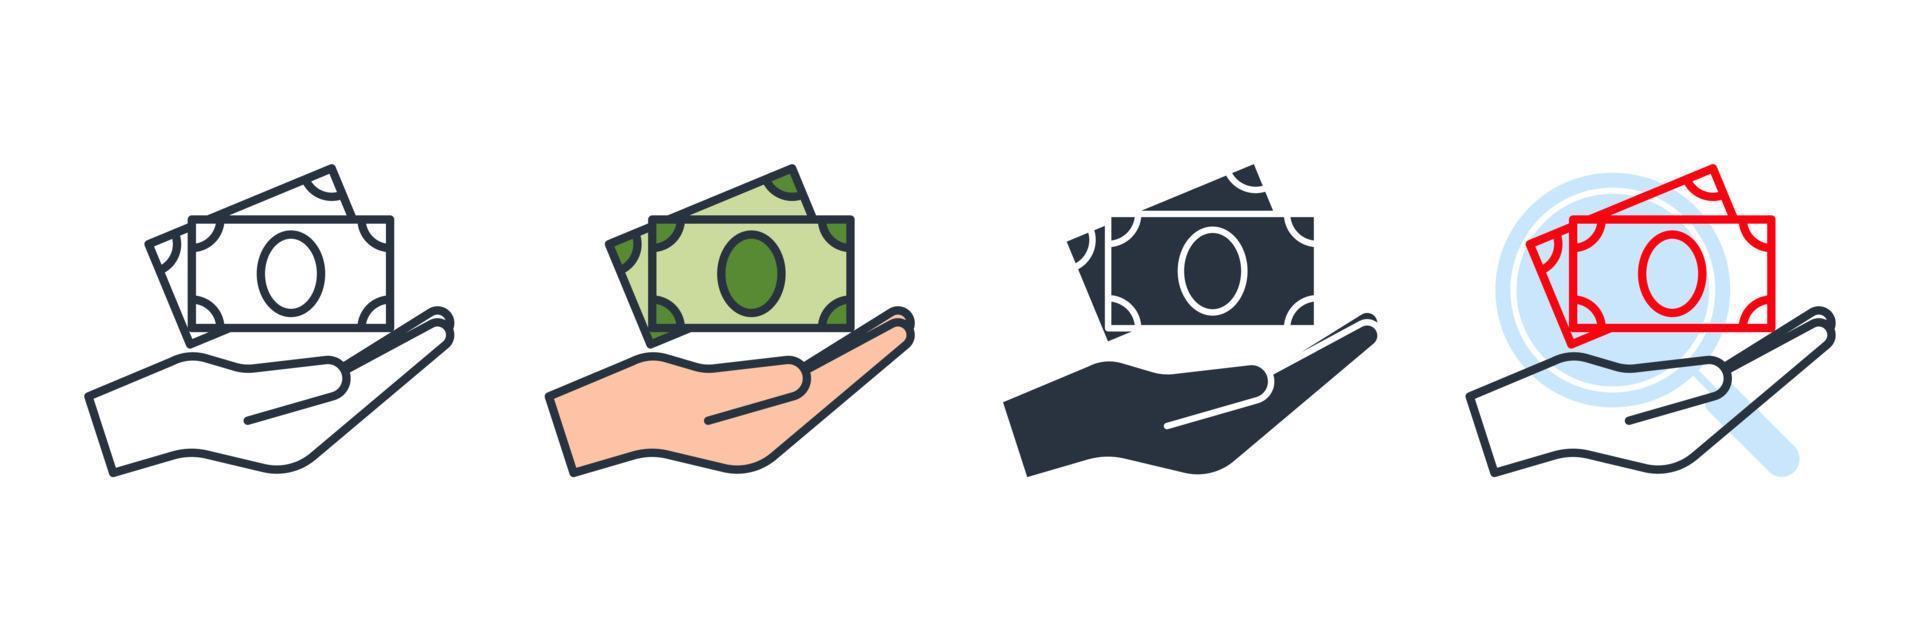 Money on hand icon logo vector illustration. finance symbol template for graphic and web design collection